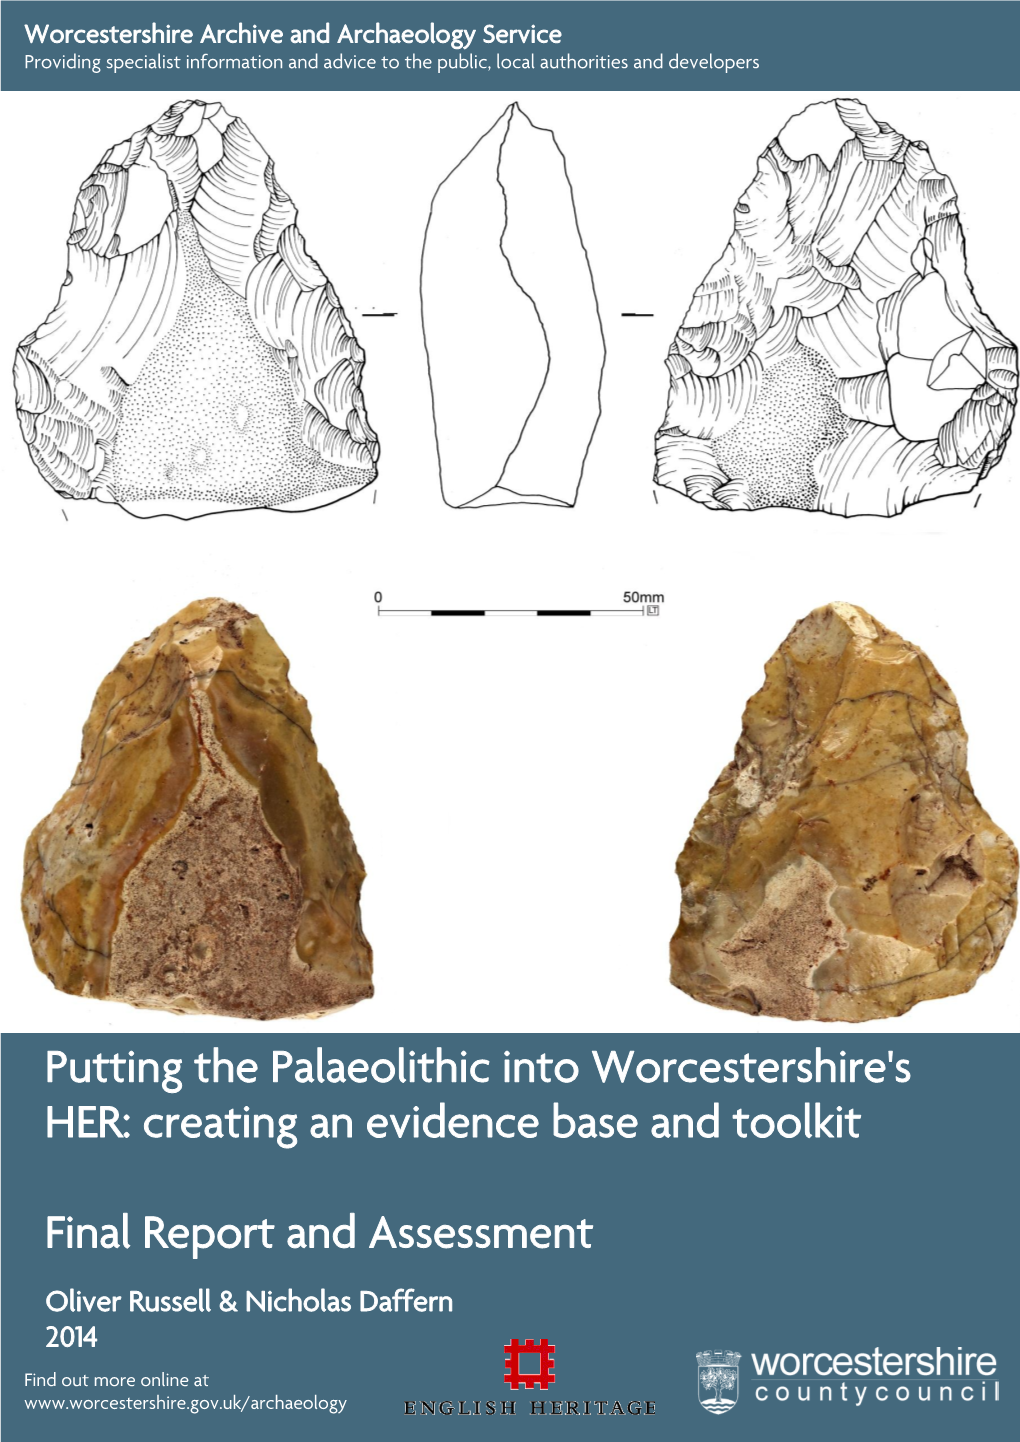 Putting the Palaeolithic Into Worcestershire's HER: Creating an Evidence Base and Toolkit